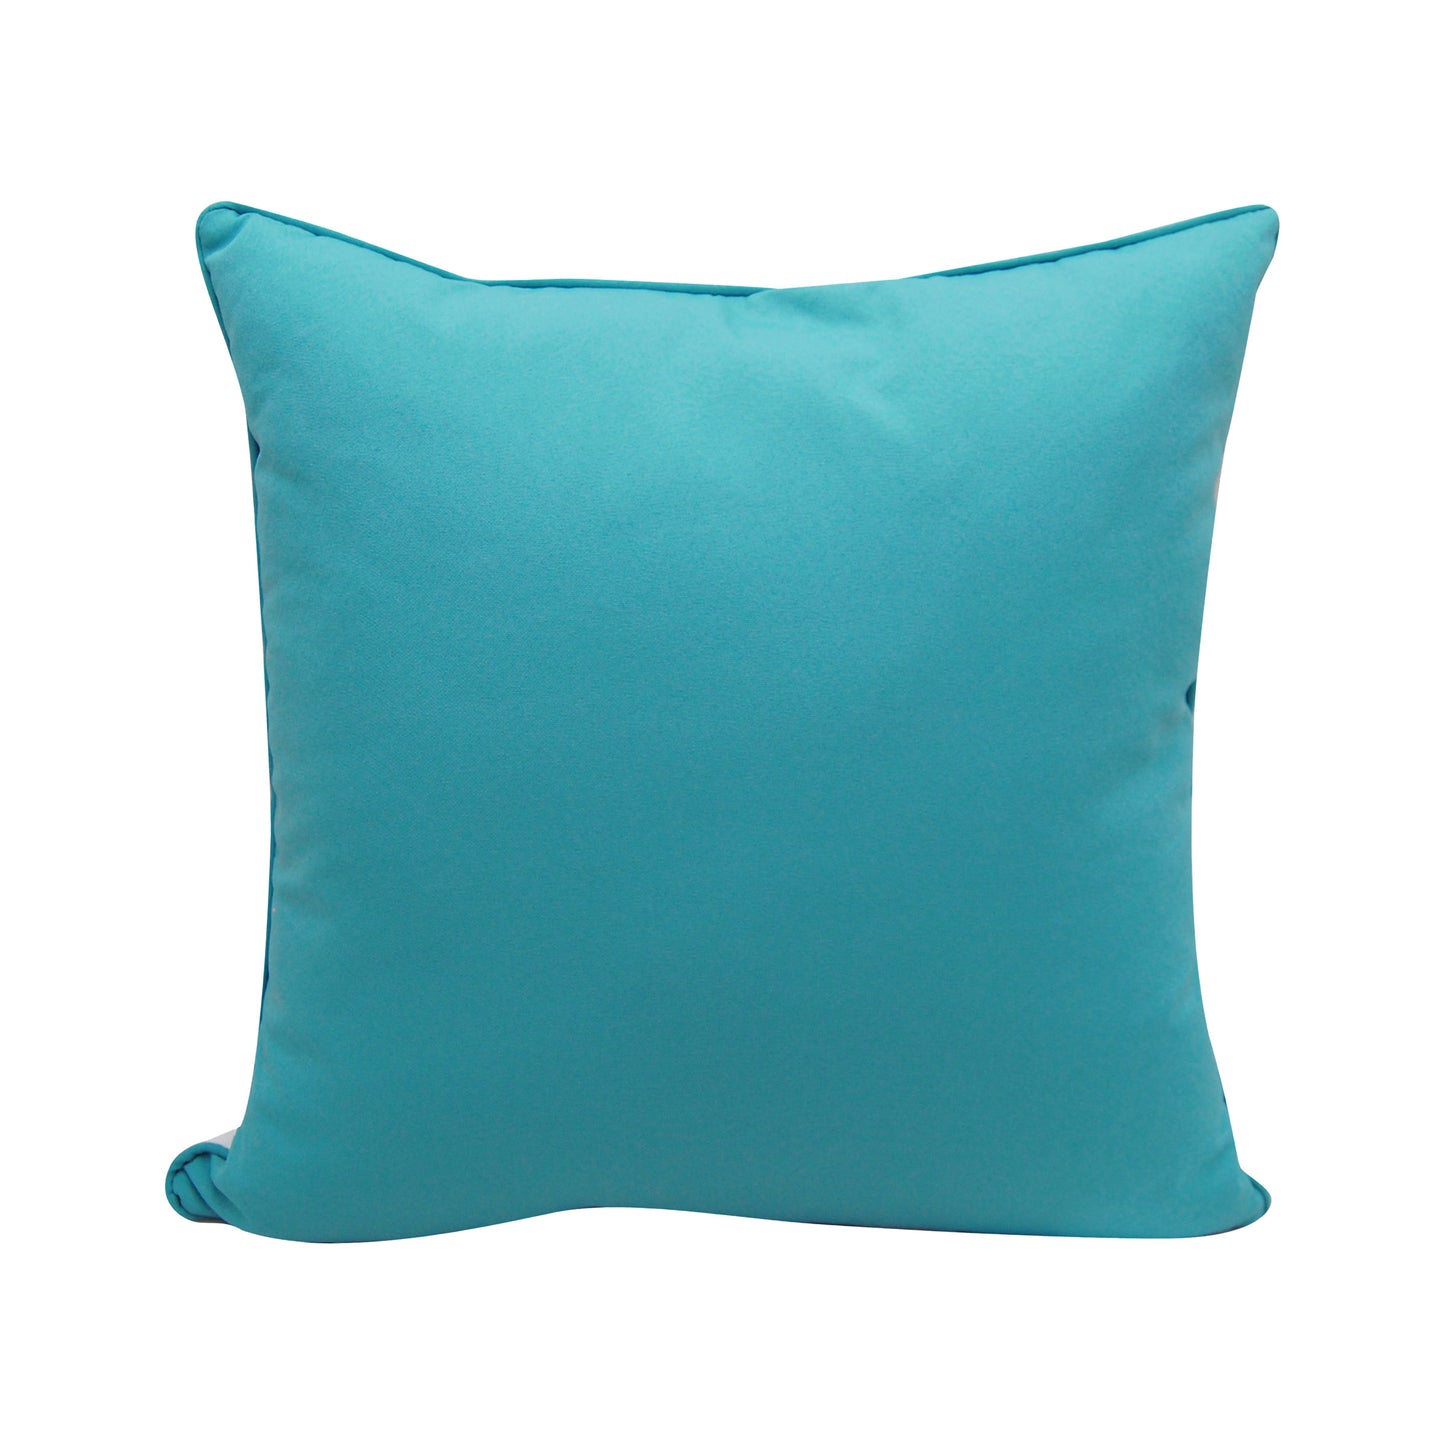 Solid teal fabric; back of the Tropical Punch Lionfish Indoor Outdoor Pillow